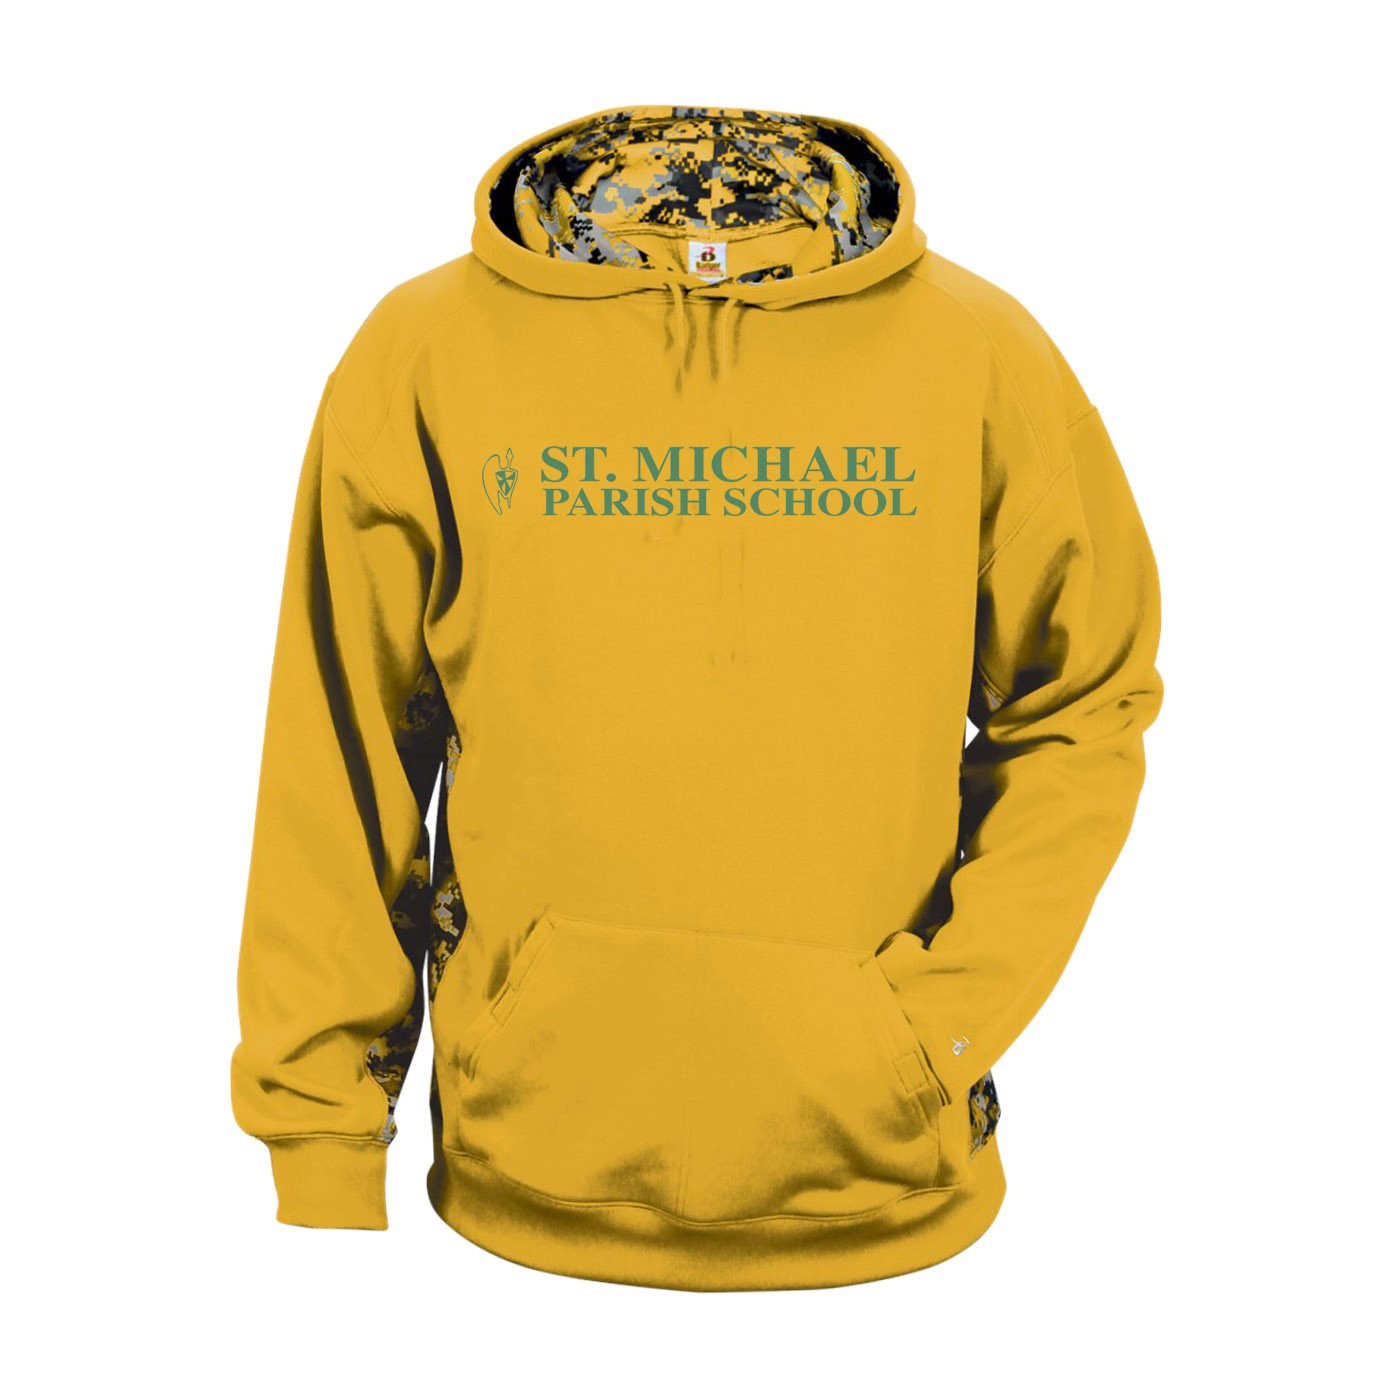 SMSU Spirit Digital Color Block Hoodie w/ Green Logo #20 - Please Allow 3-4 Weeks for Delivery